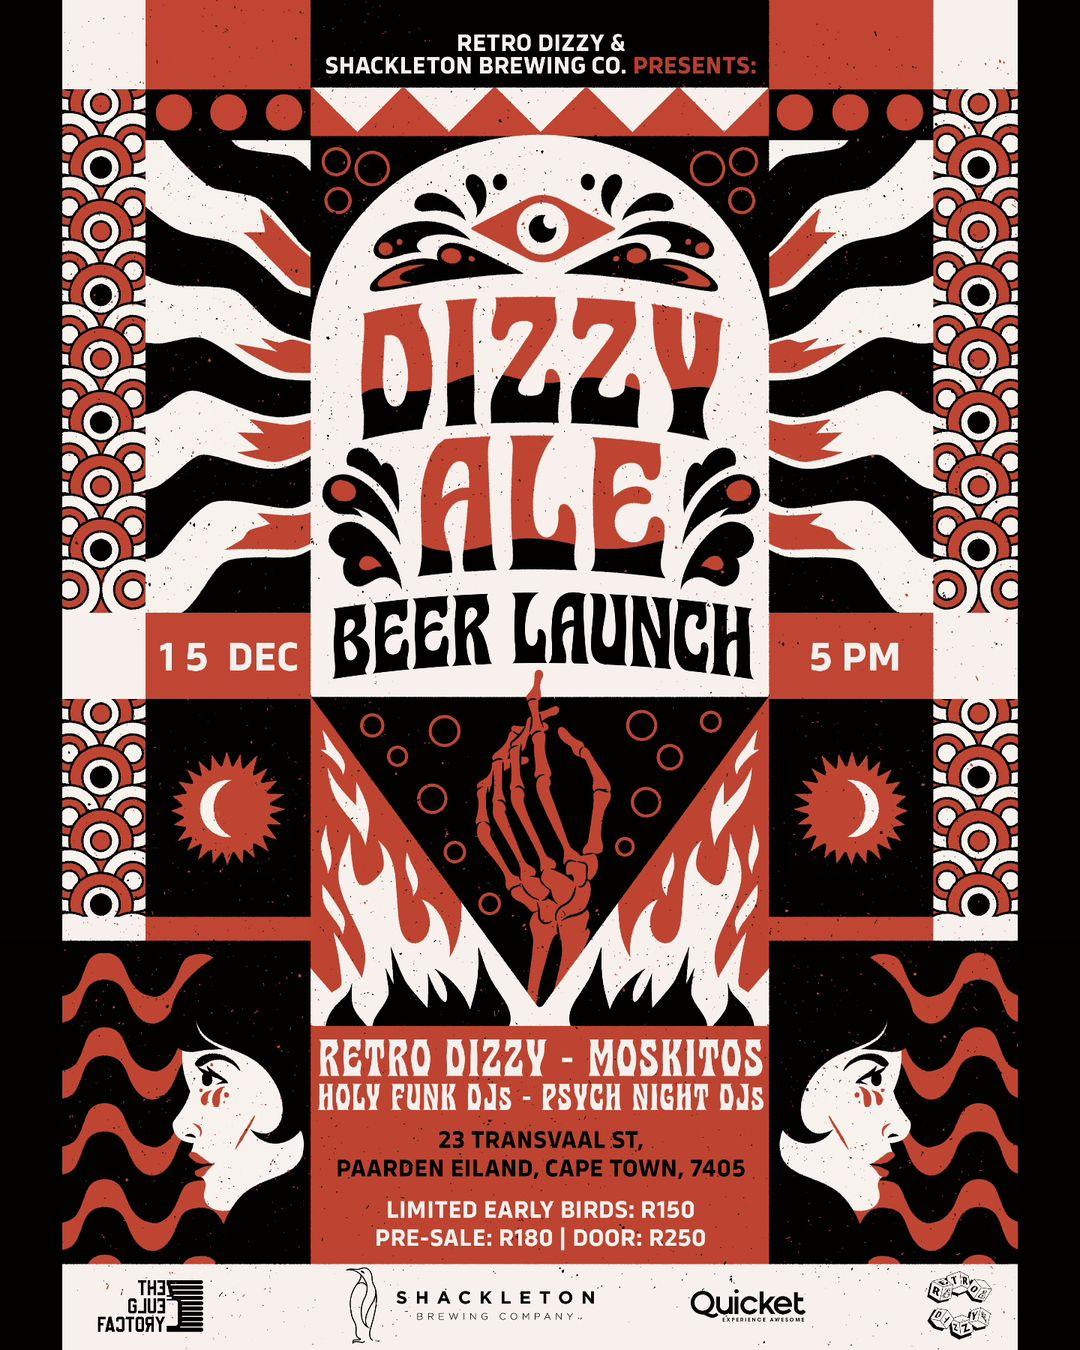 Join us at The Shred in Cape Town for the exclusive Dizzy Ale Beer Launch event on 15 Dec at 5 PM, presented by Shackleton Brewing Co. Witness a remarkable lineup featuring Retro Dizzy, Moskitos, Holy Funk DJs, and Psych Night DJs. Enjoy early bird prices at R180 with door tickets available at R250. Don't miss this unique blend of craft beer and eclectic music!